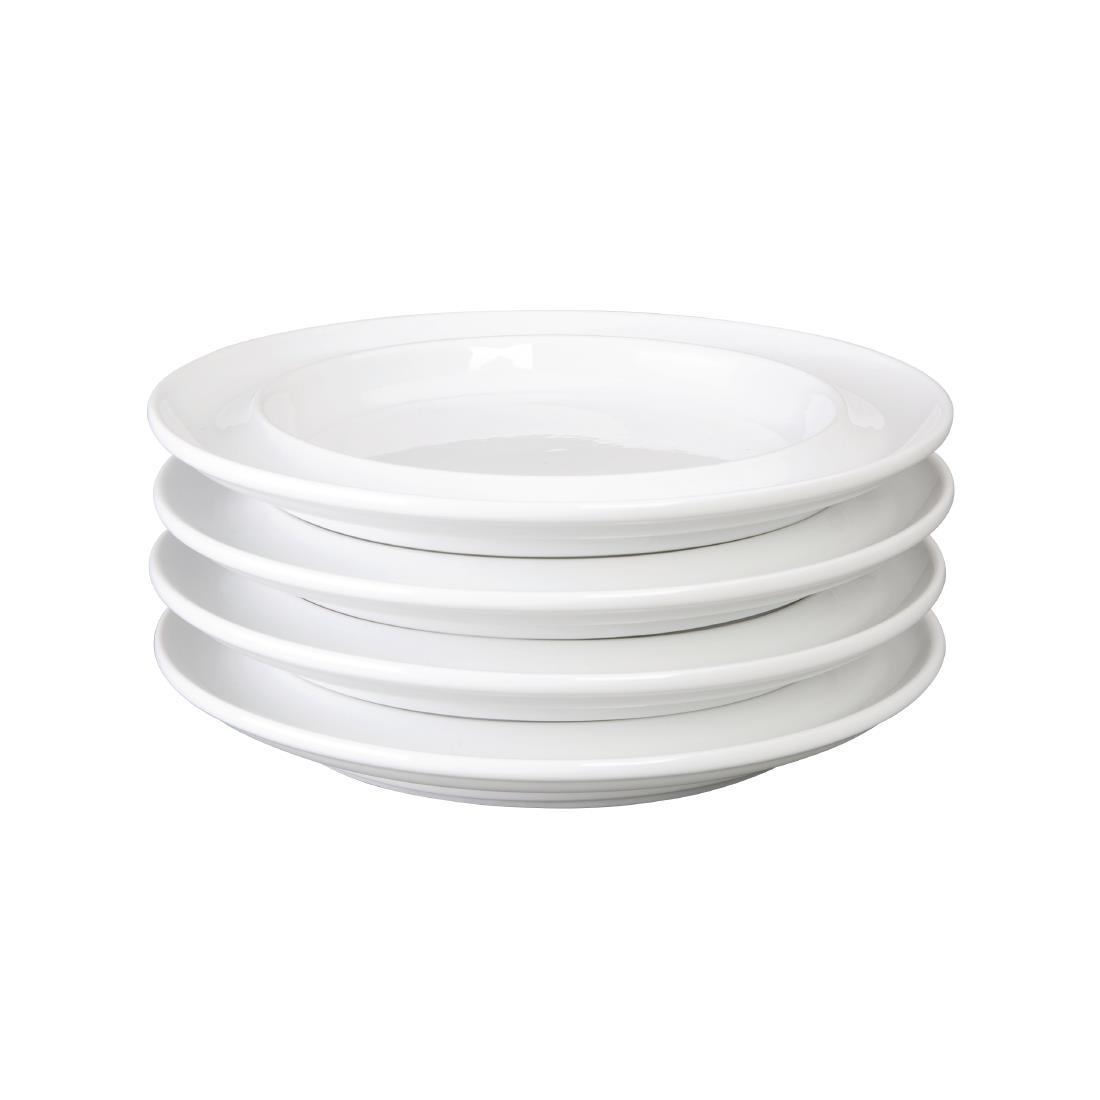 Olympia Heritage Raised Rim Plates White 203mm (Pack of 4) - DW152  - 4